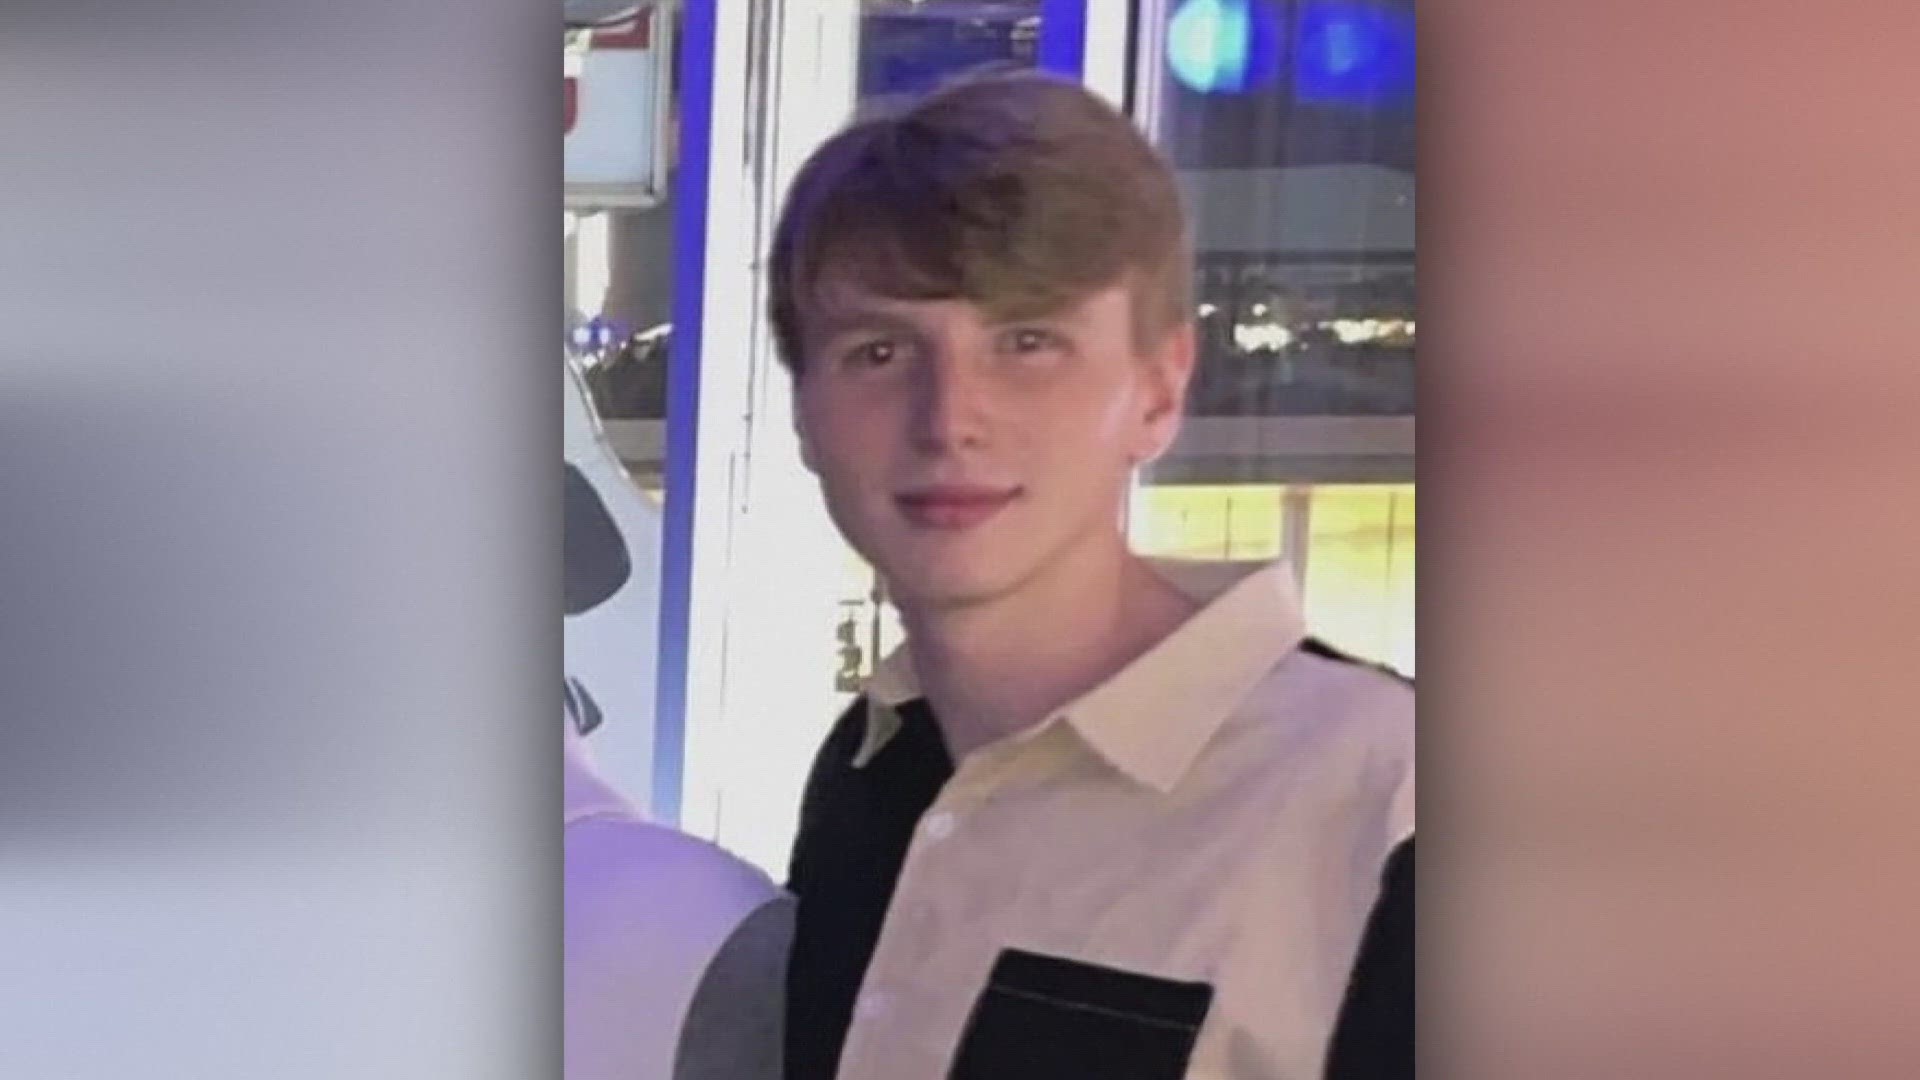 A report released by the Tennessee Alcoholic Beverage Commission finds "no clear evidence" that Riley Strain was overserved on the night of his death.